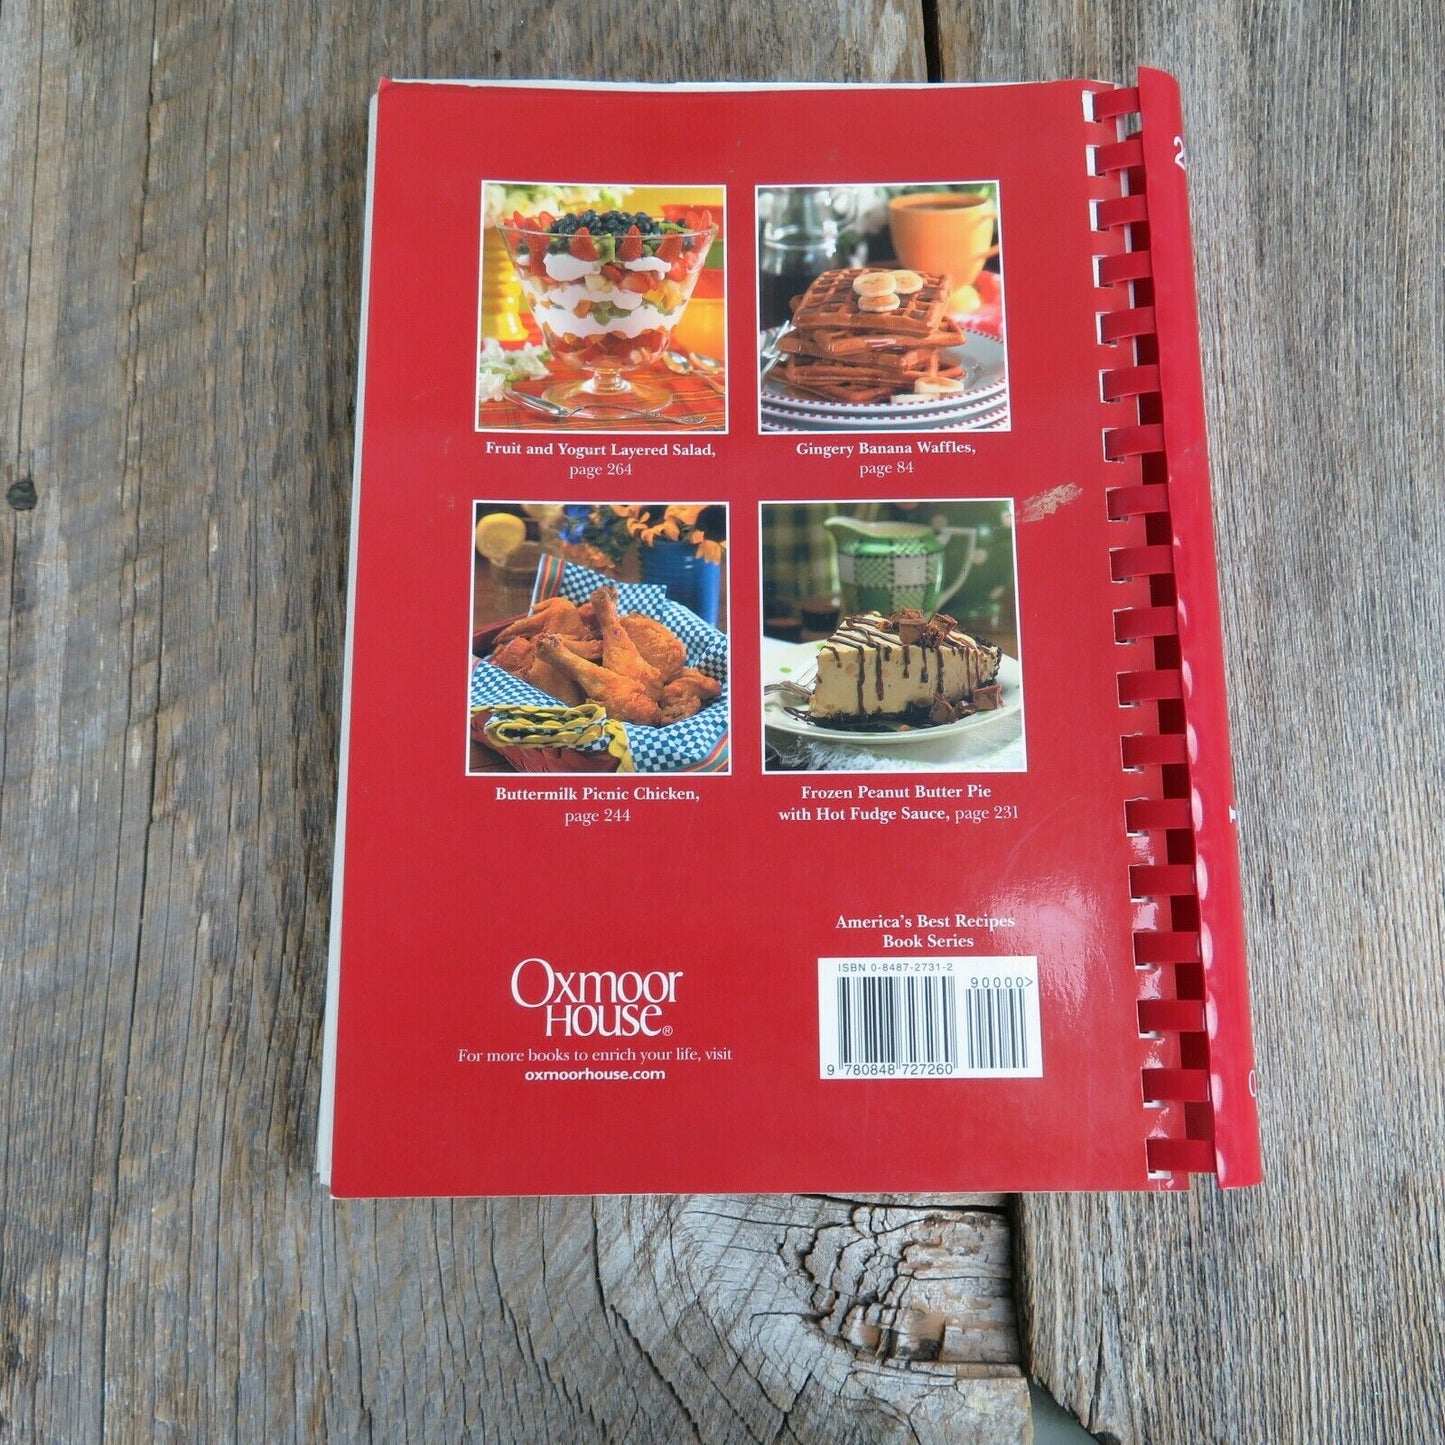 America's Best Recipes 2003 Hometown Collection Cookbook Oxmoor House Spiral